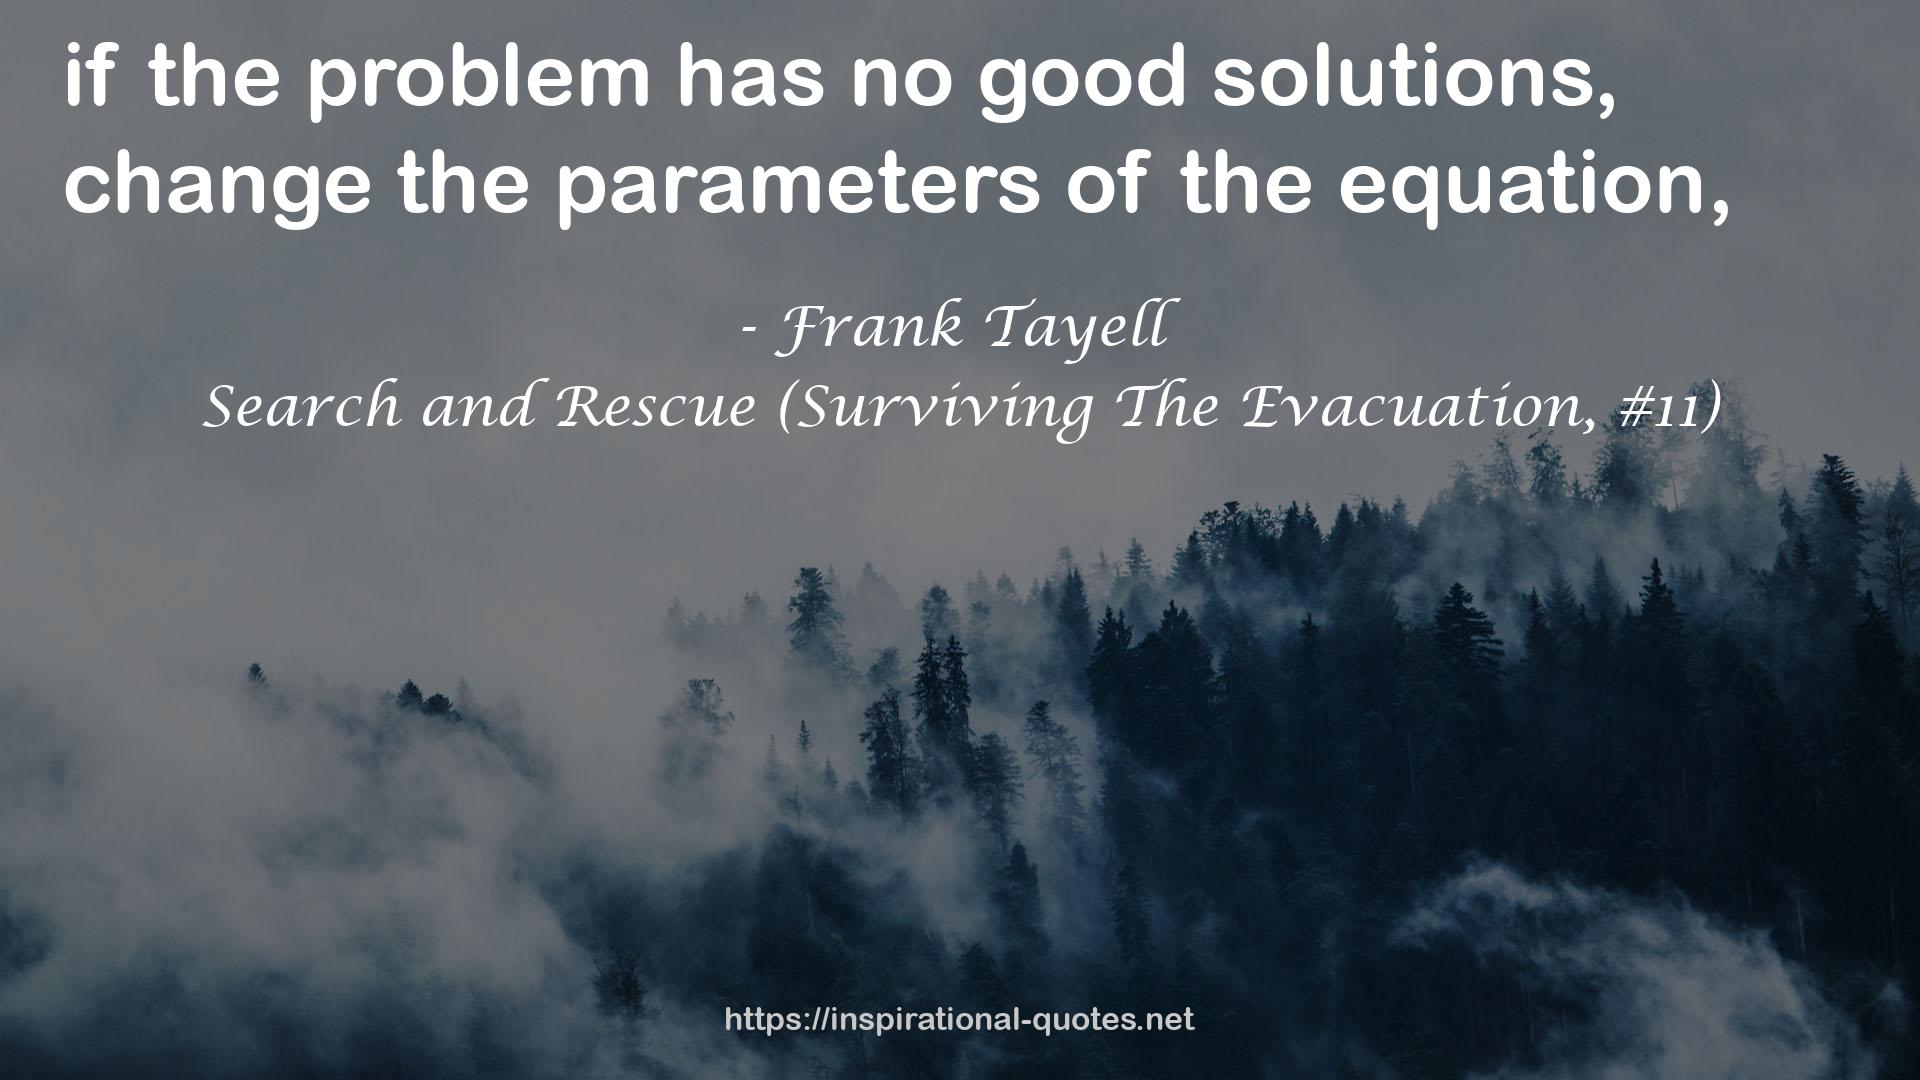 Search and Rescue (Surviving The Evacuation, #11) QUOTES